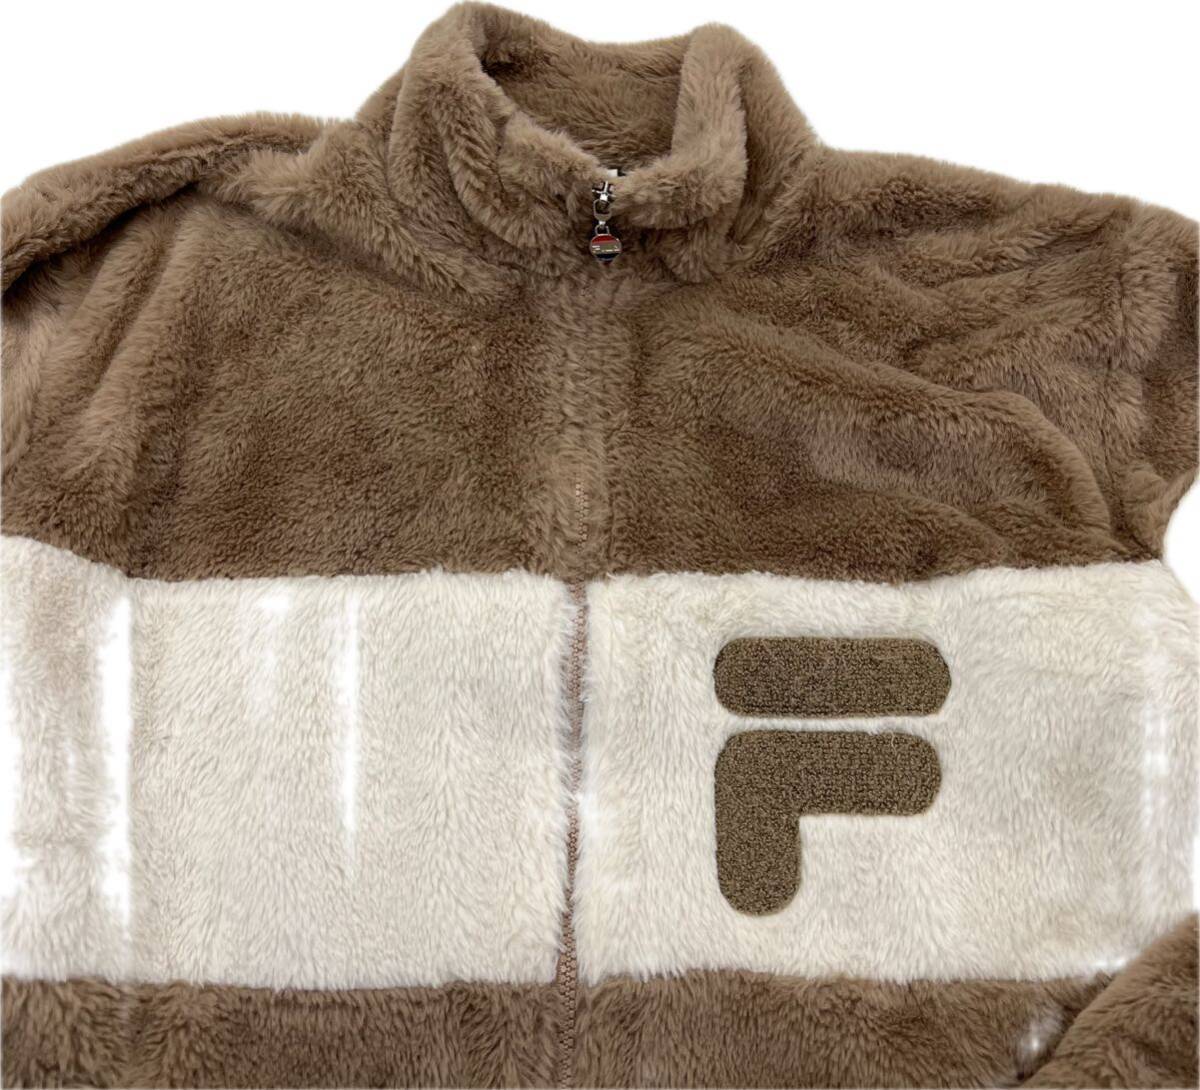 FILA * feel of * boa fleece jacket Brown white M relax sport Street holiday casual part shop put on filler #I314